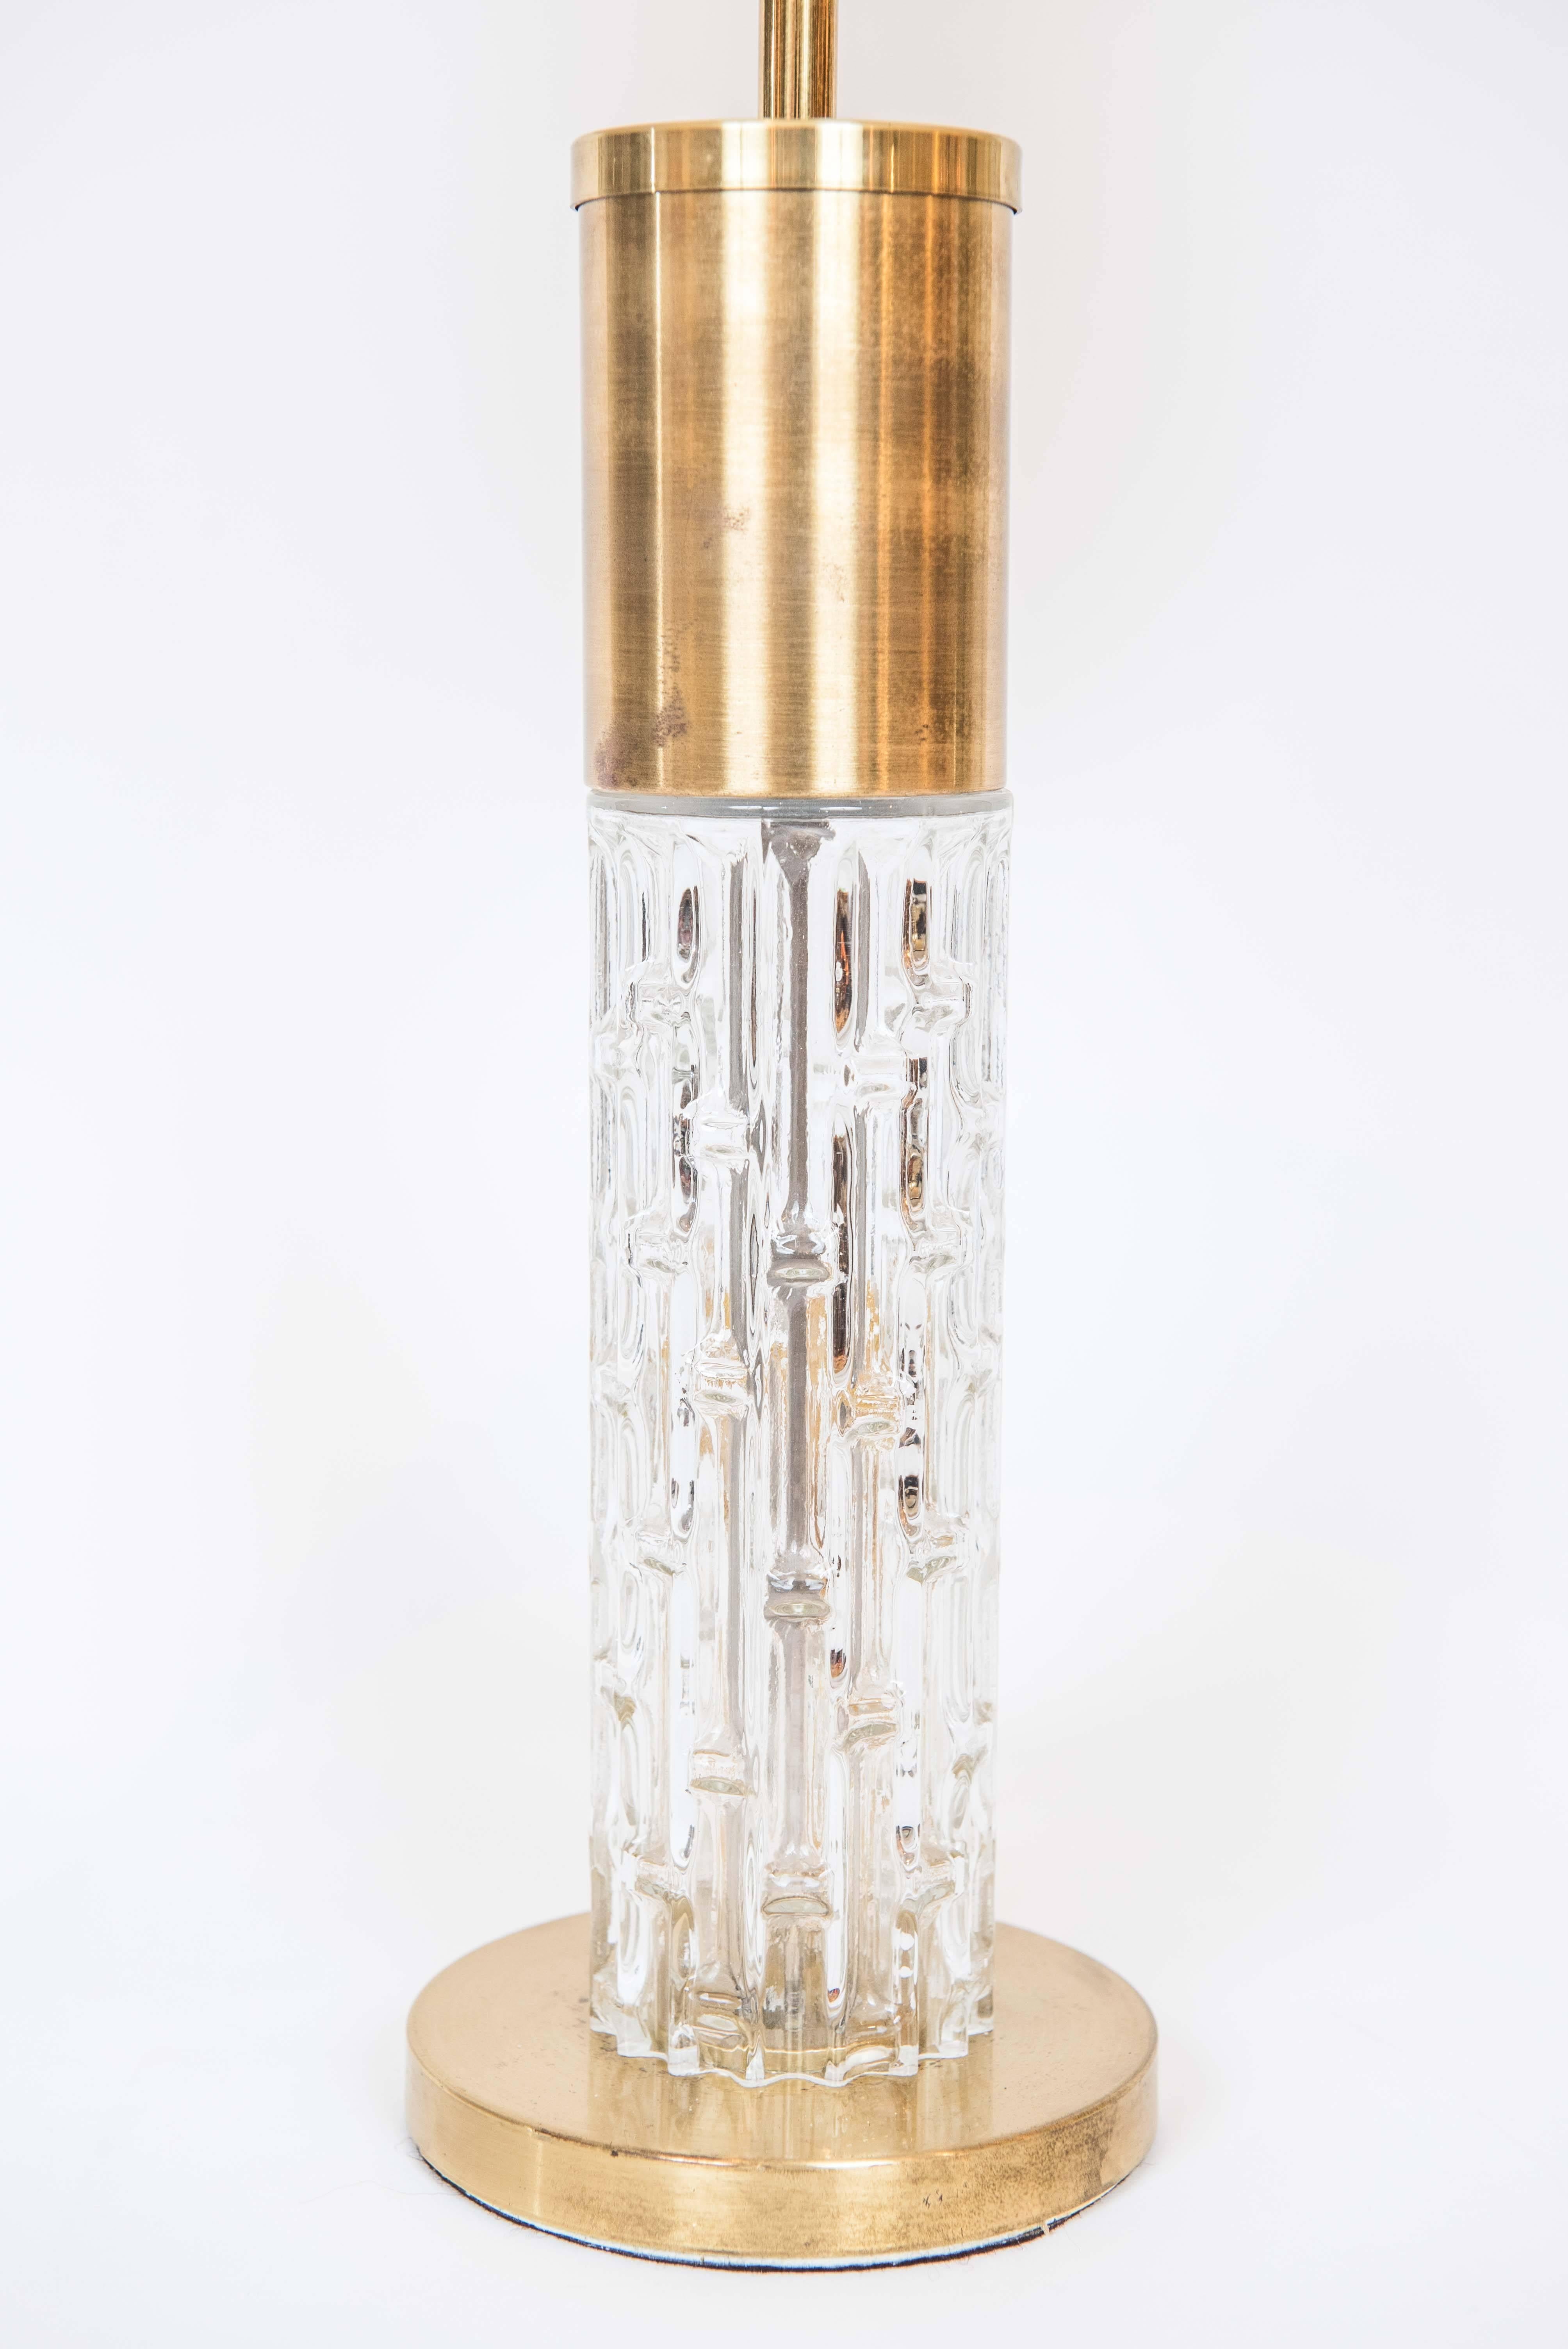 A fashionable pair of brass plated lamps with a stylish molded glass column.
The lamps have been updated with new sockets, wire, and shades.
Shades are optional. Overall height to the top of the shade is 27